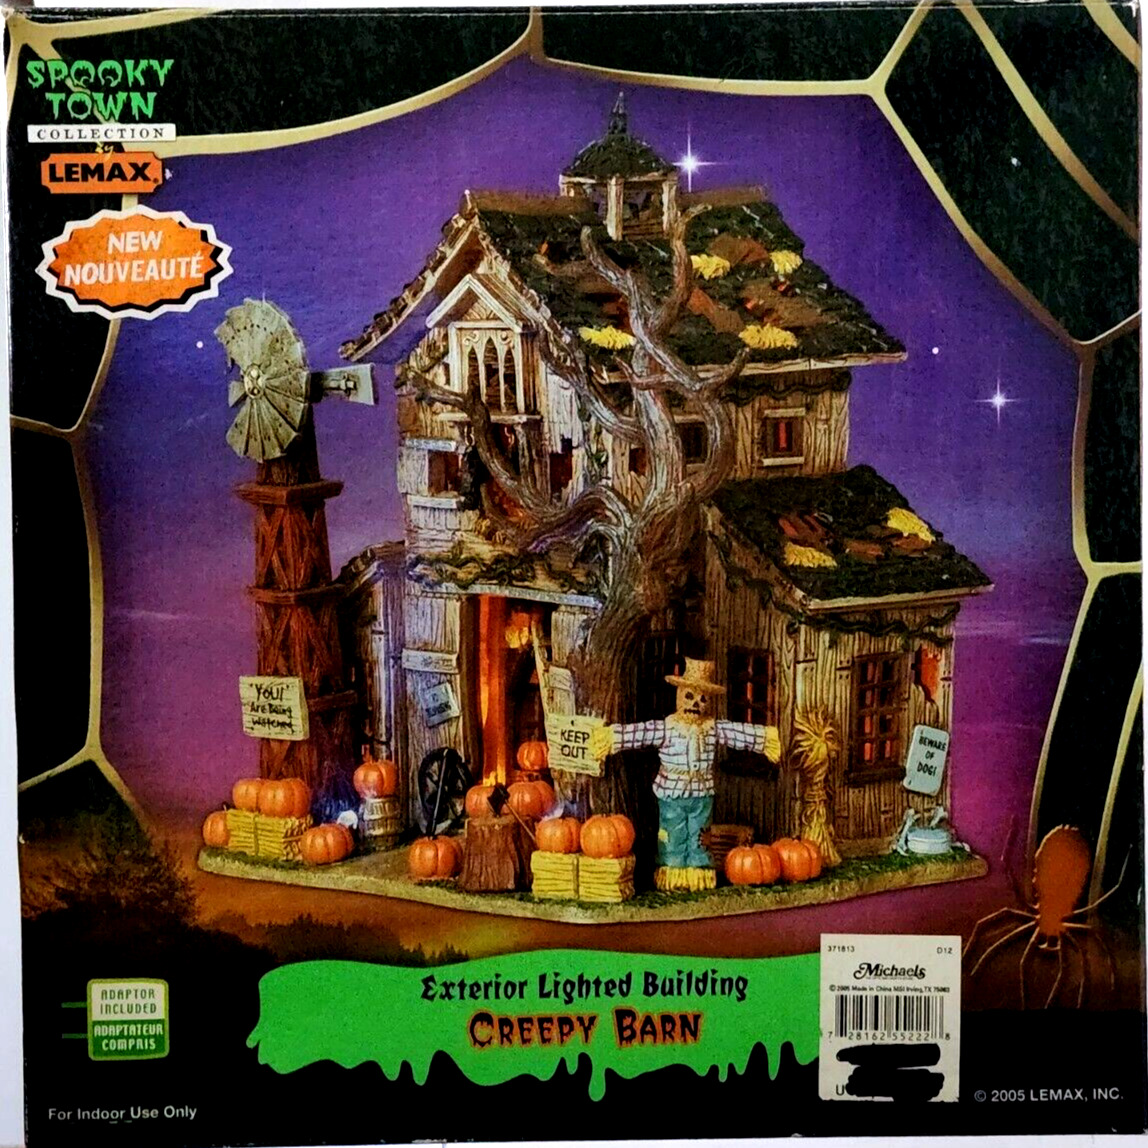 Lemax Creepy Barn Spooky Town 2005 Halloween Village Lighted Building 55222 New